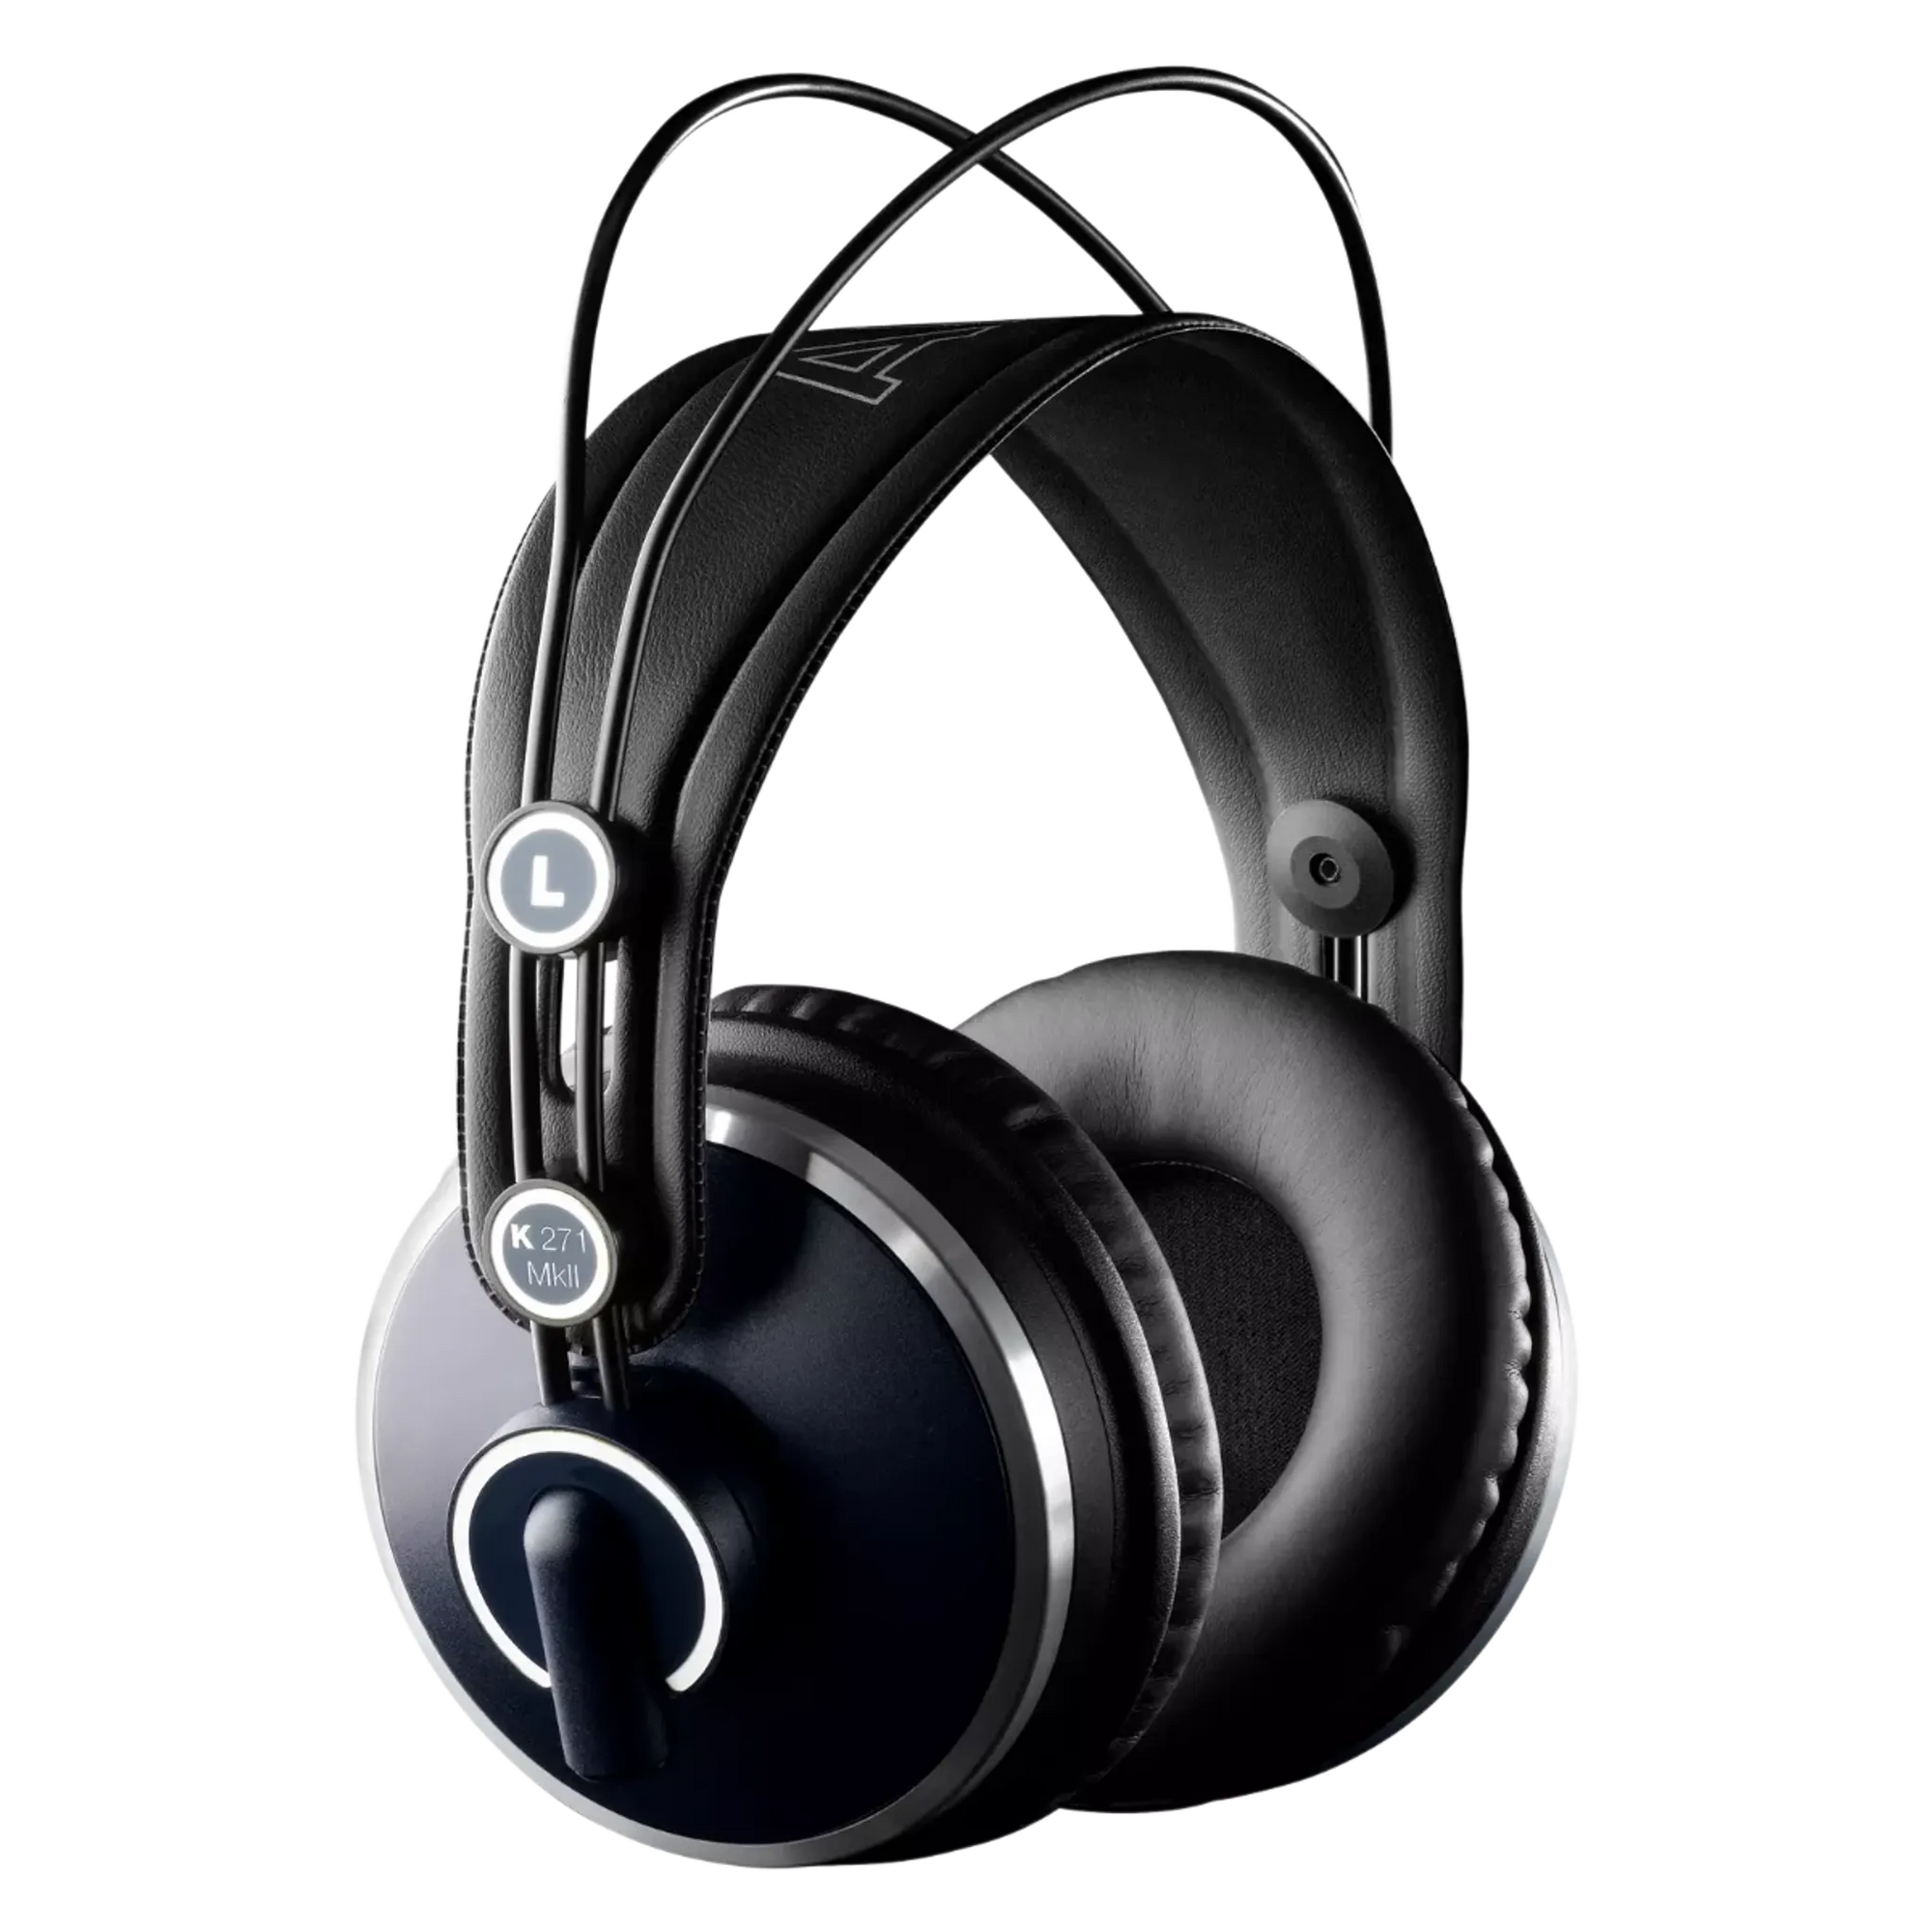 The AKG K271 MKII are professional over-ear headphones designed for studio mixing, studio monitoring and live performance applications.